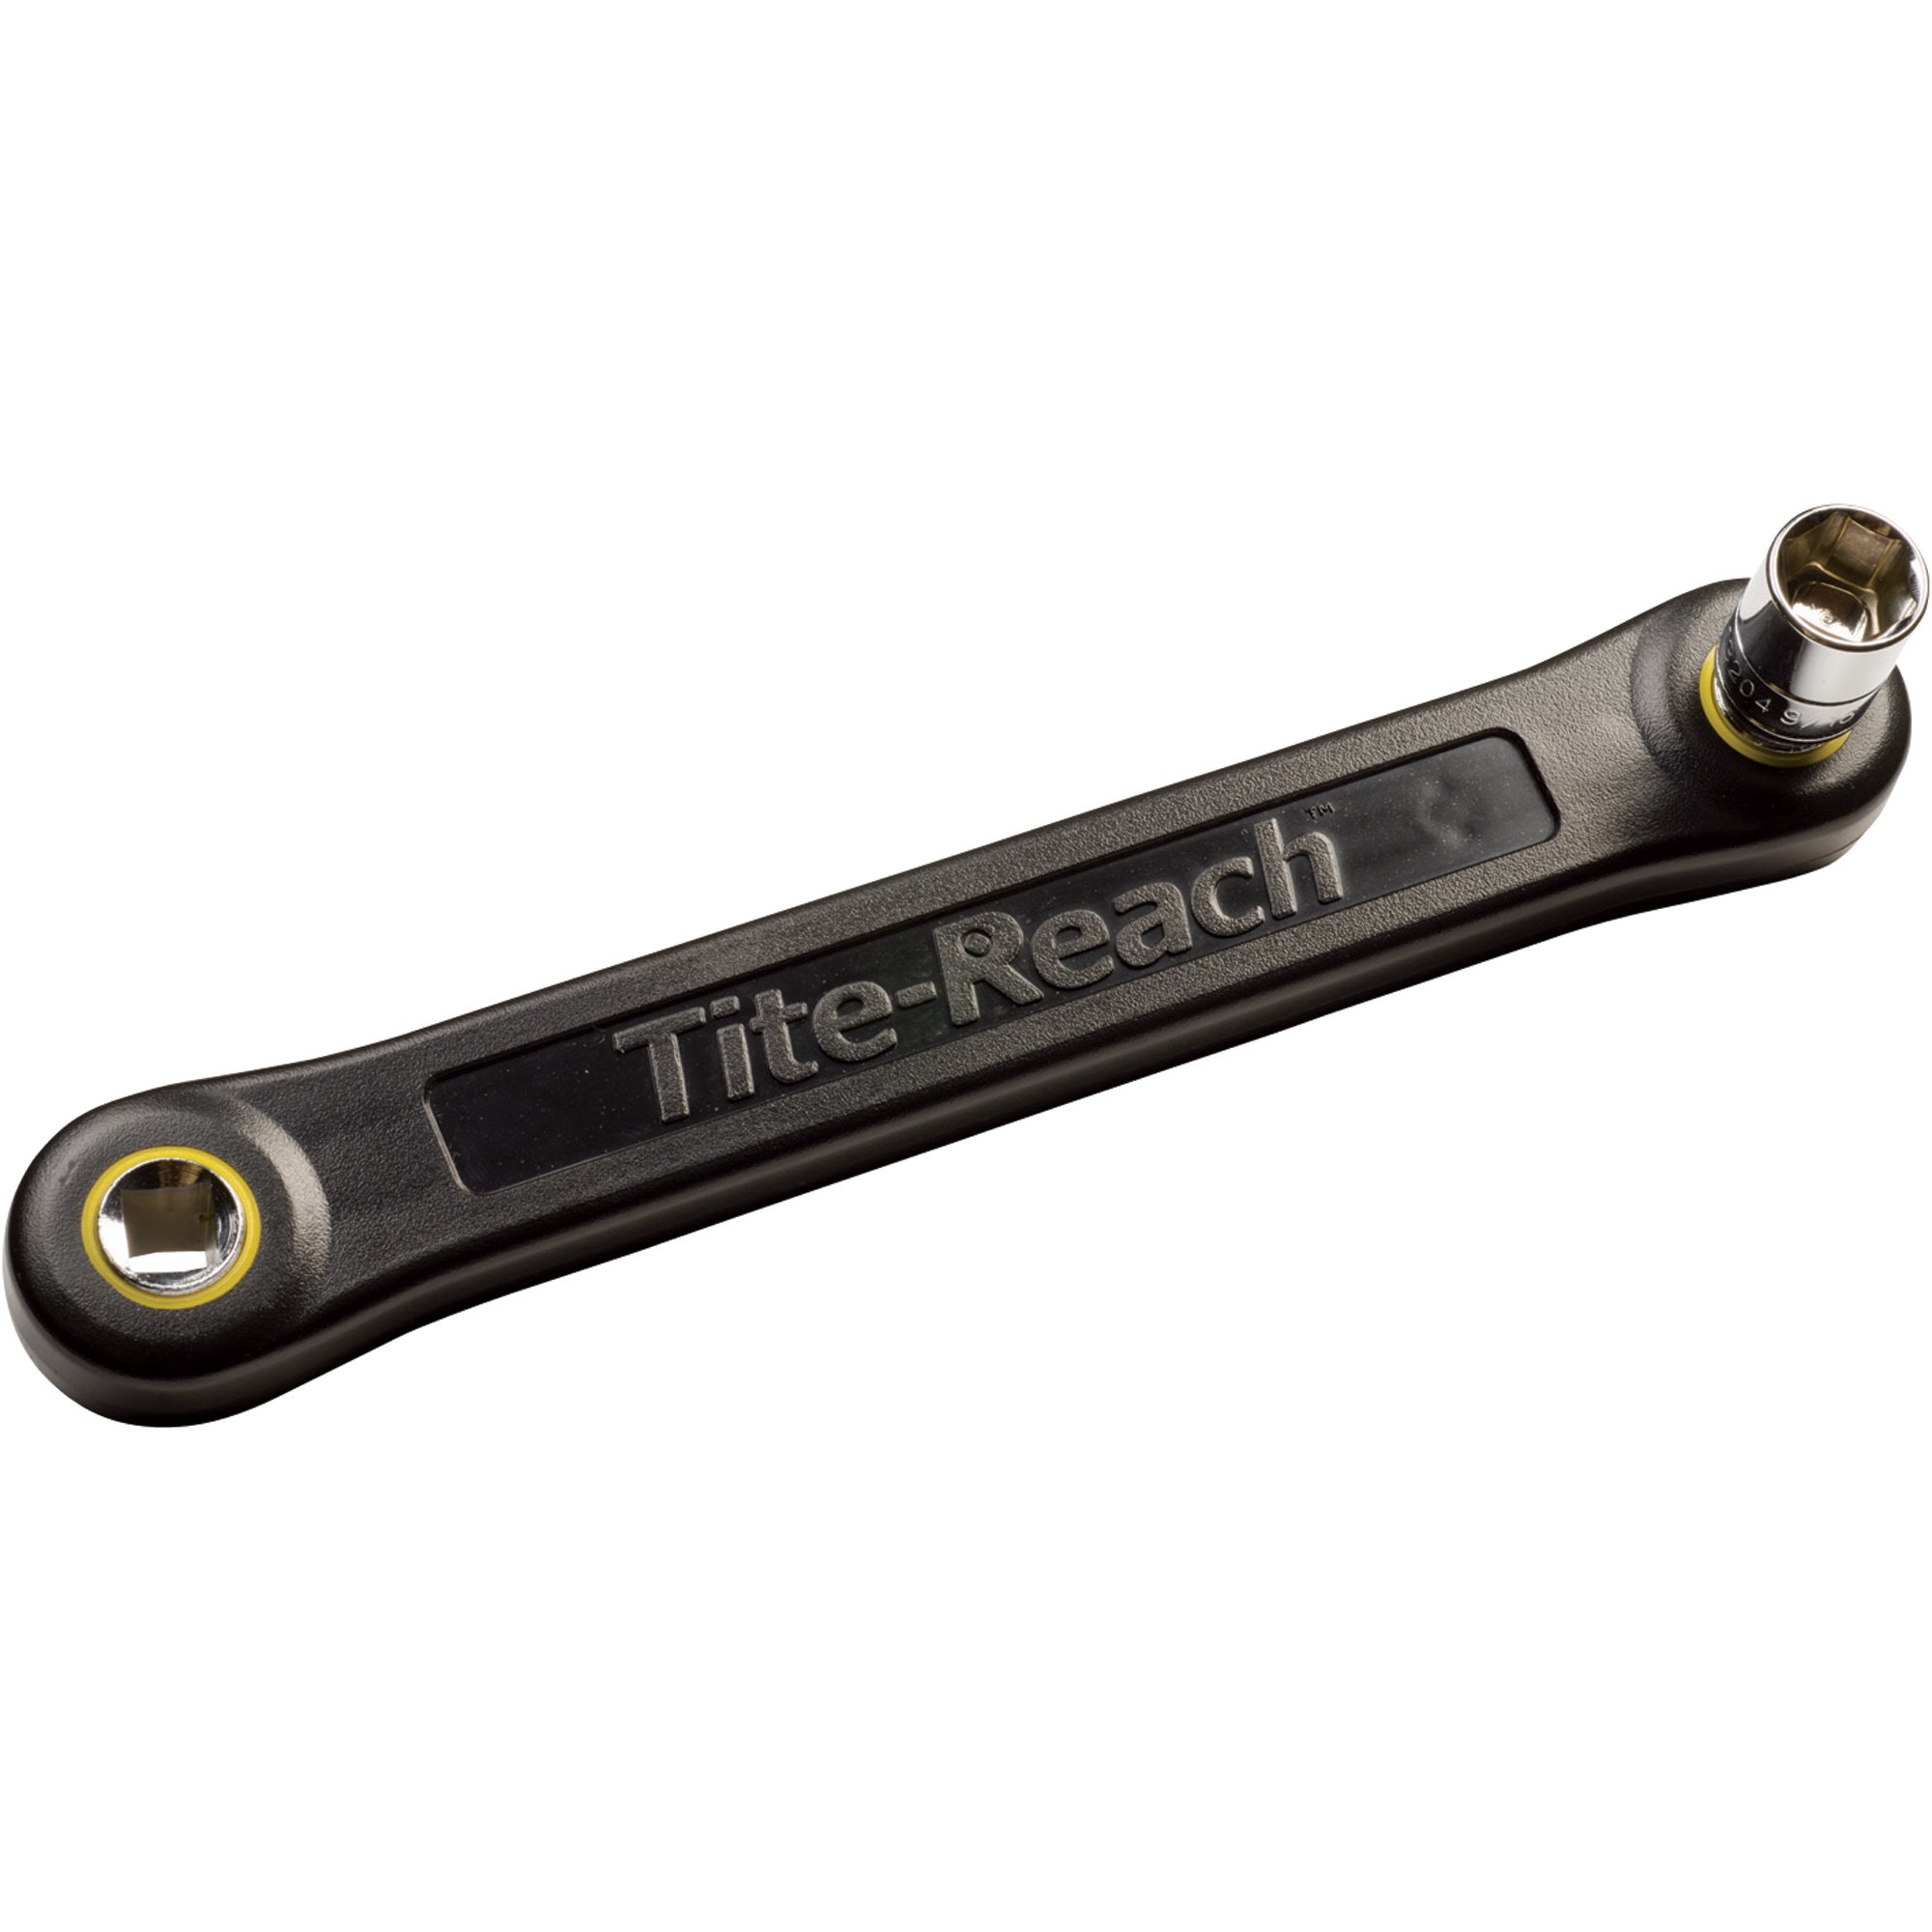 TITE Reach 3/8 Pro Extension Wrench